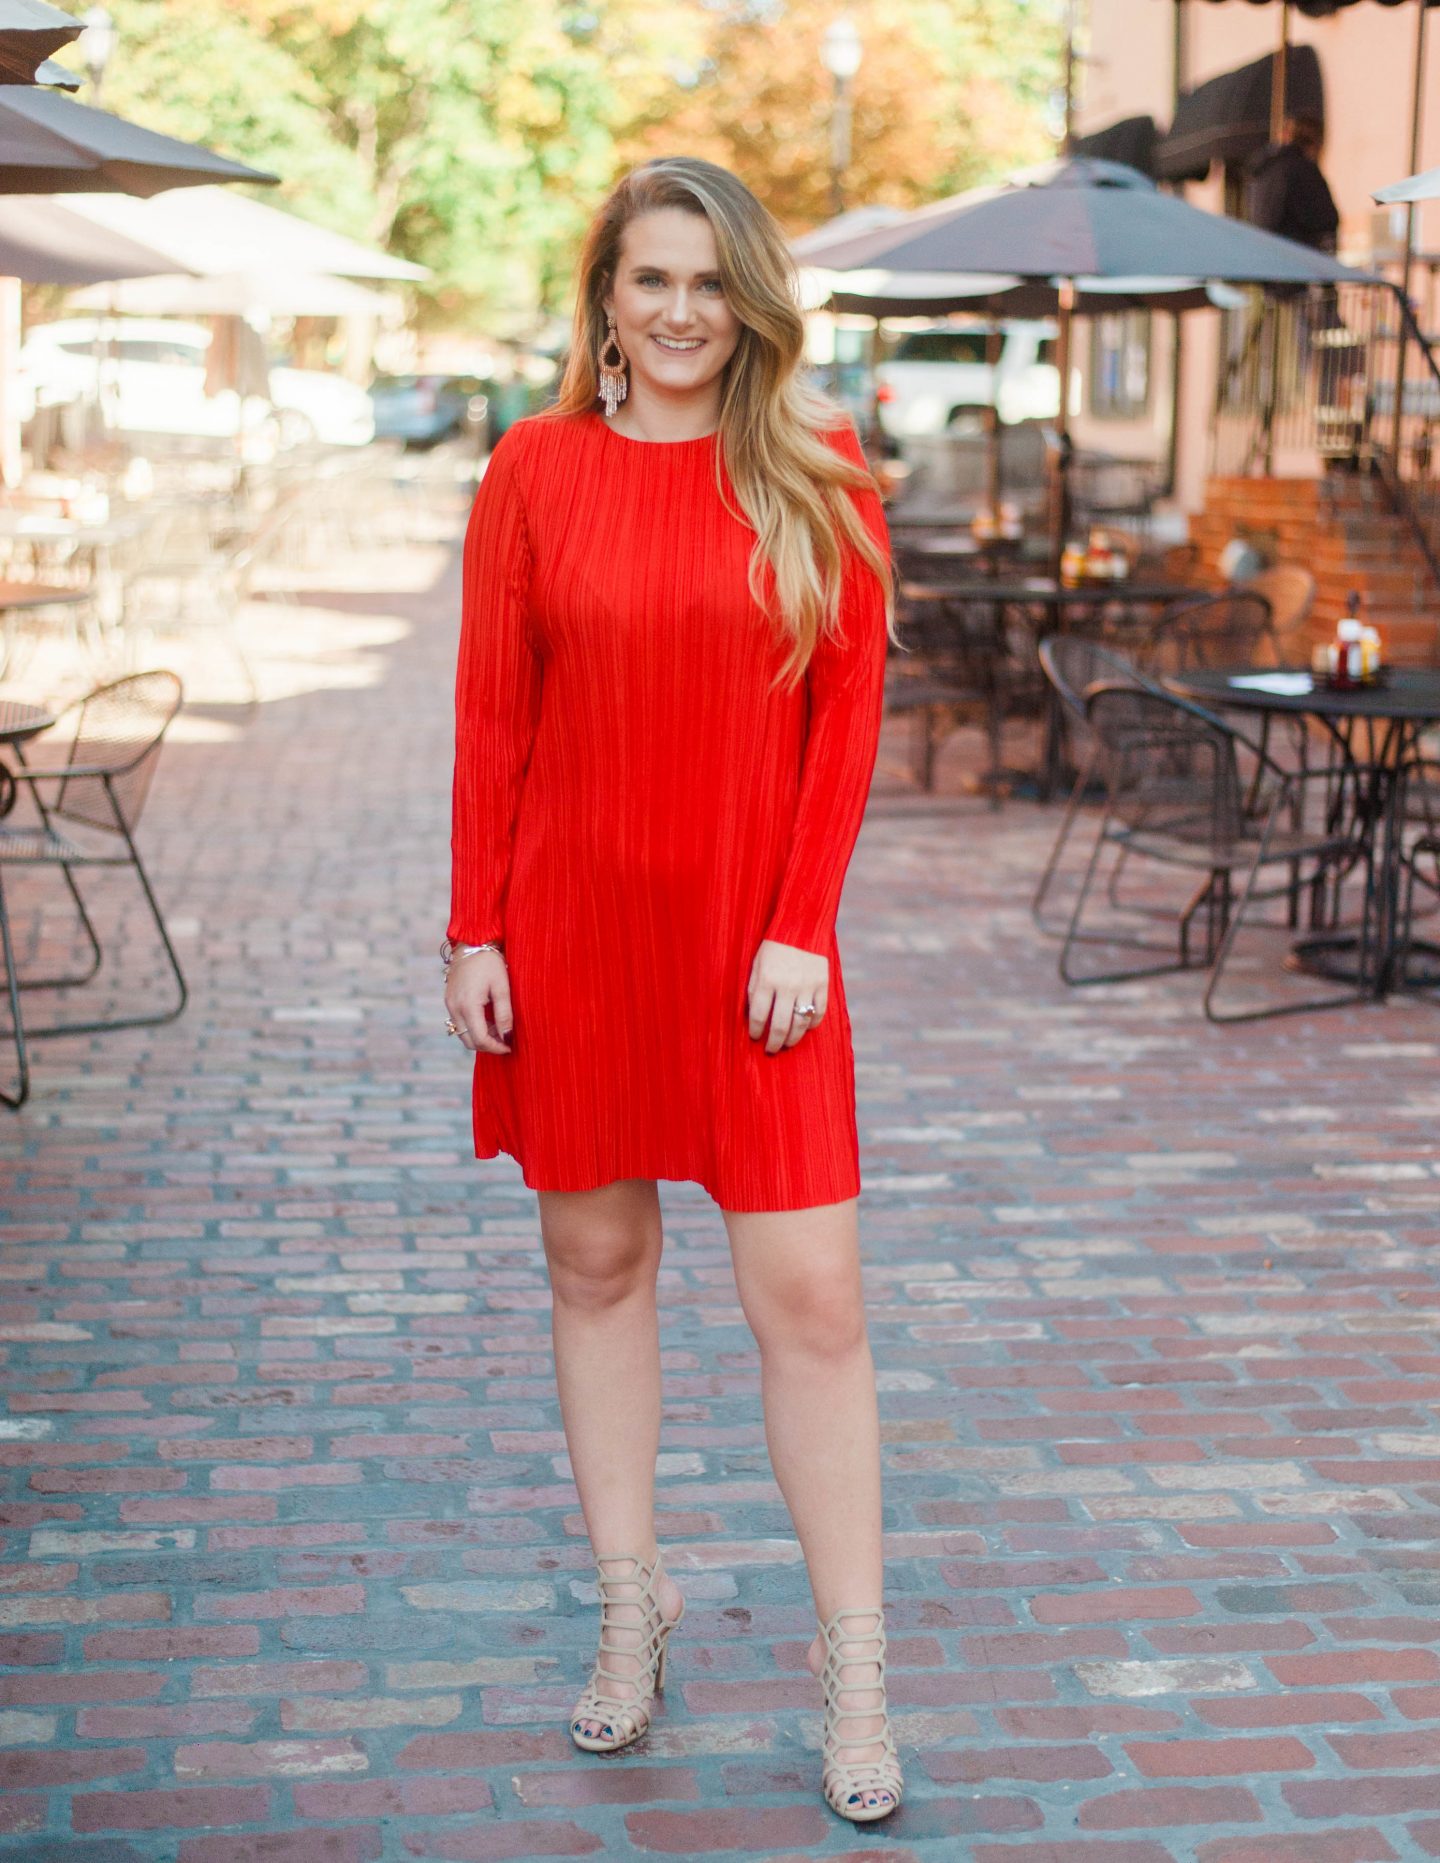 Fall Wedding Outfit & Our Weekend In Savannah